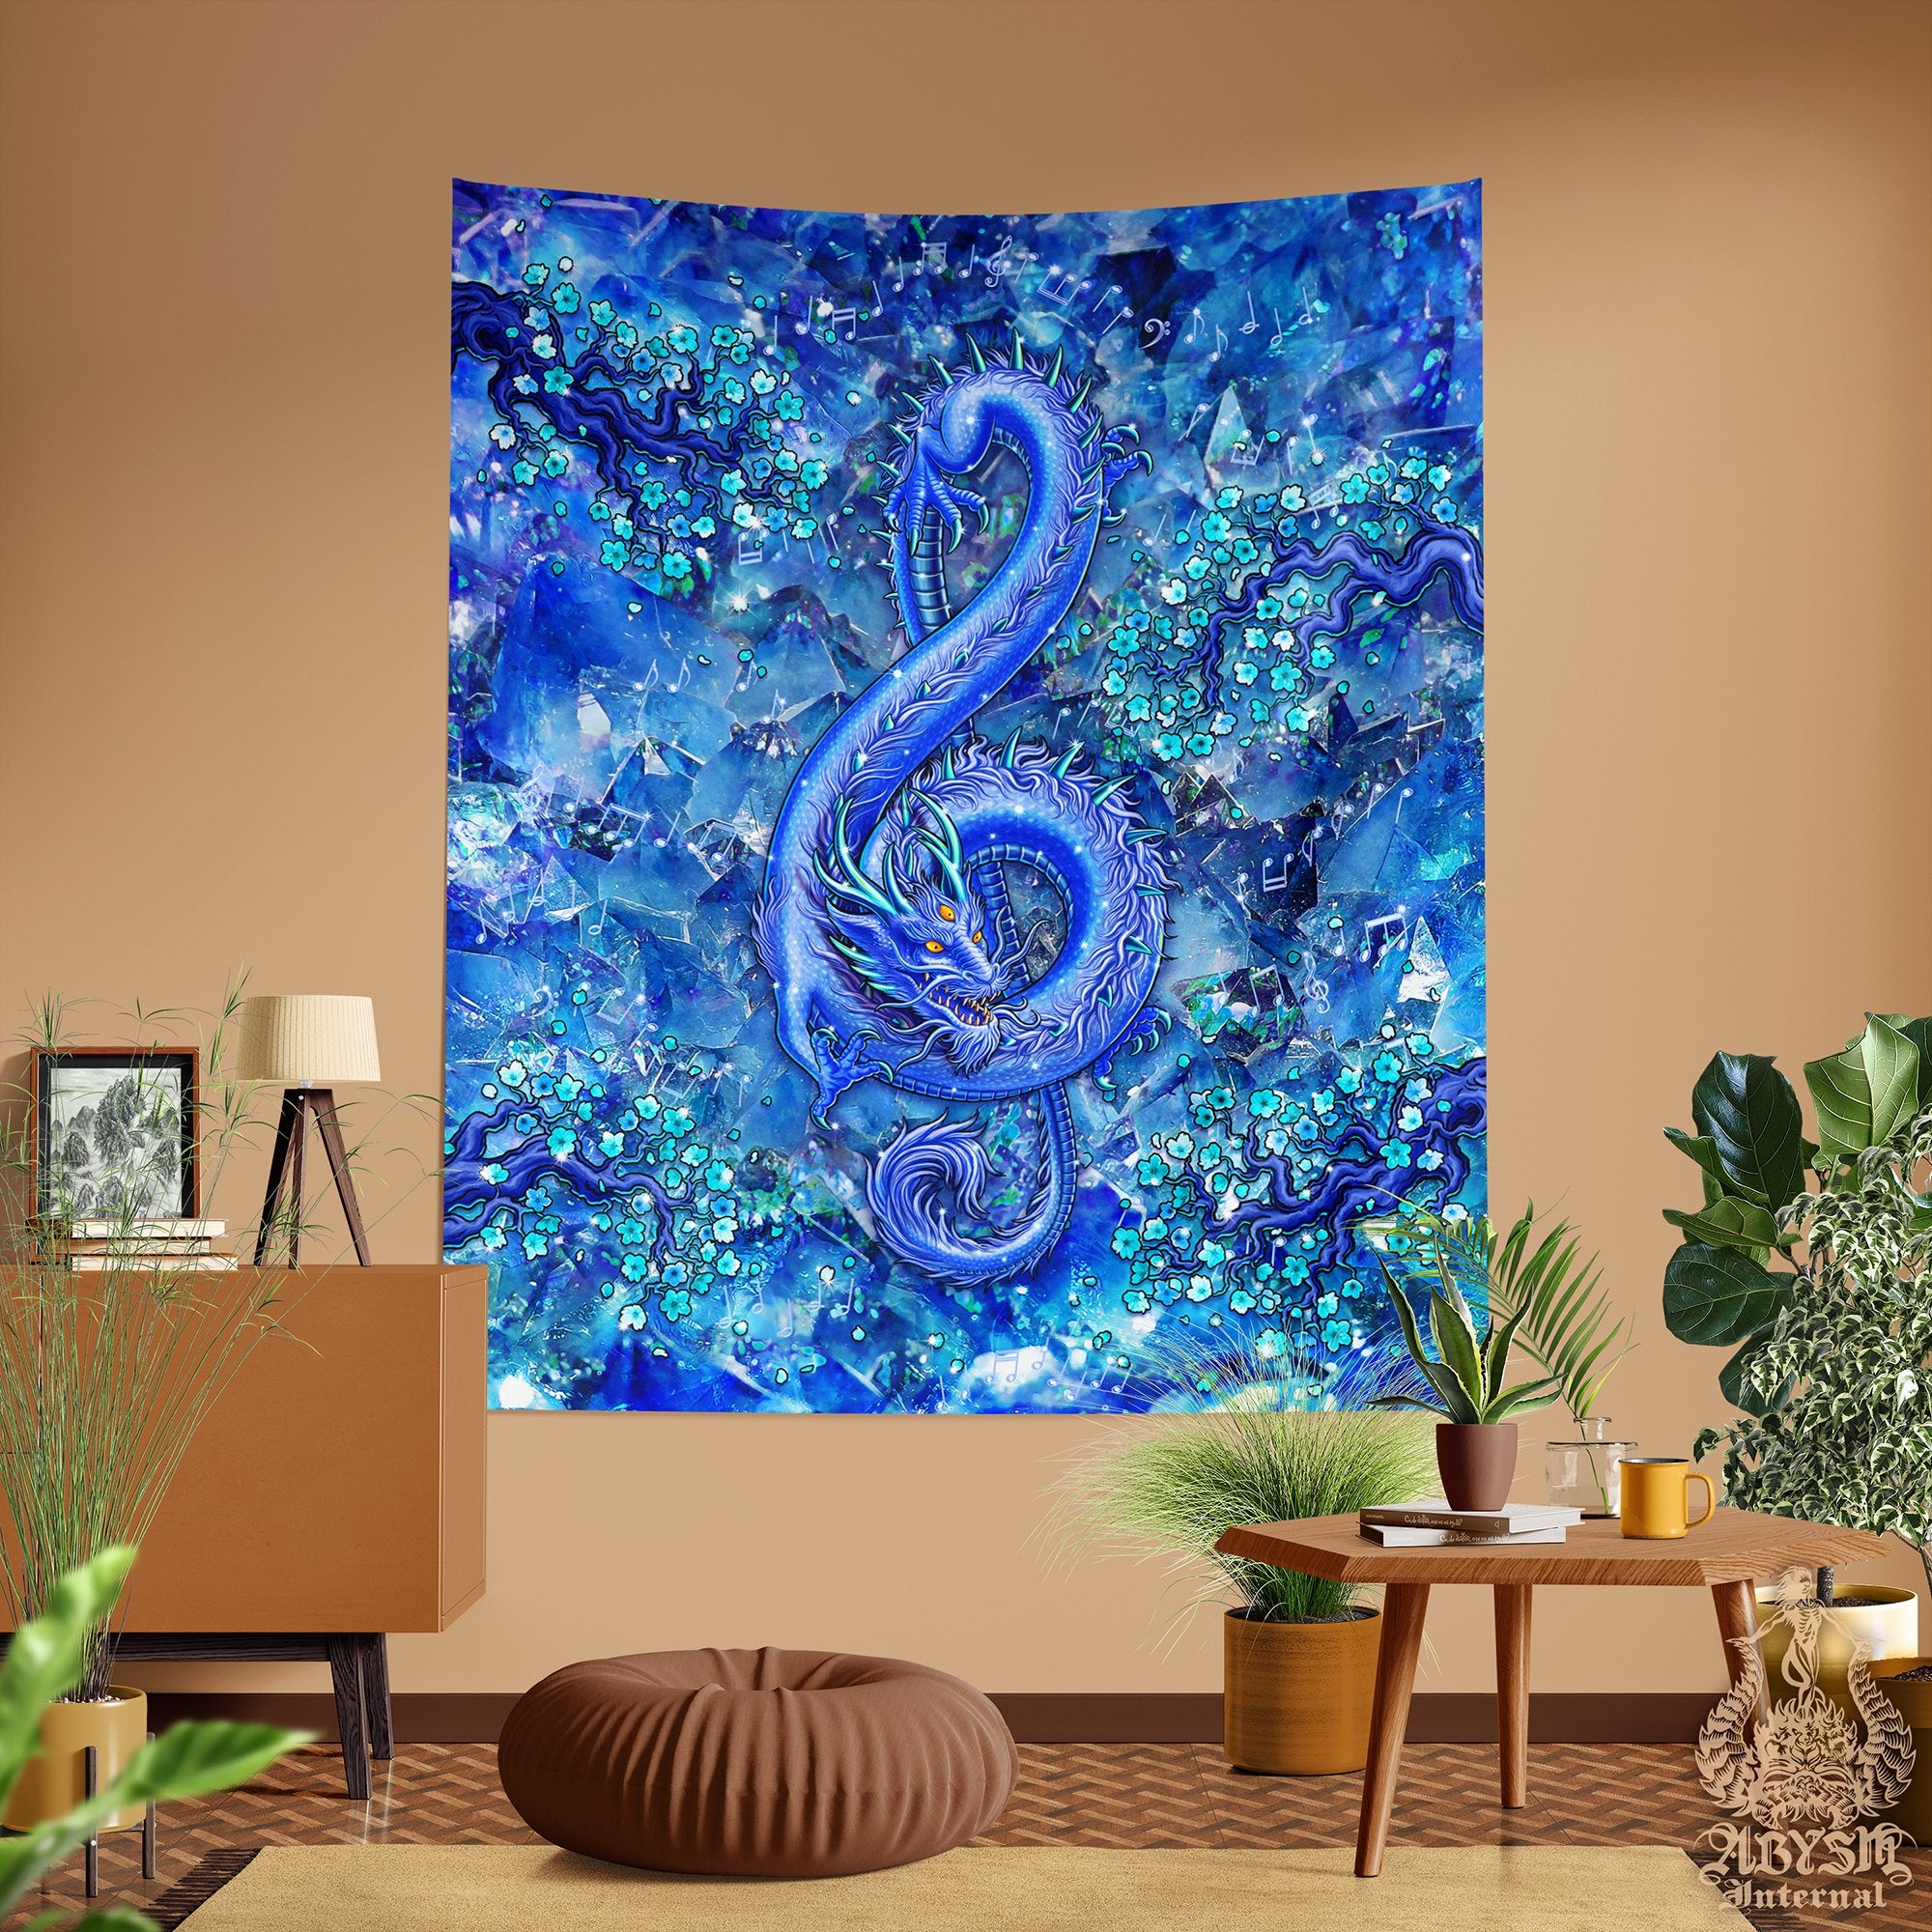 Dragon Tapestry, Music Wall Hanging, Boho and Indie Home Decor, Vertical Art Print - Gemstone, Treble Clef, 8 Colors - Abysm Internal